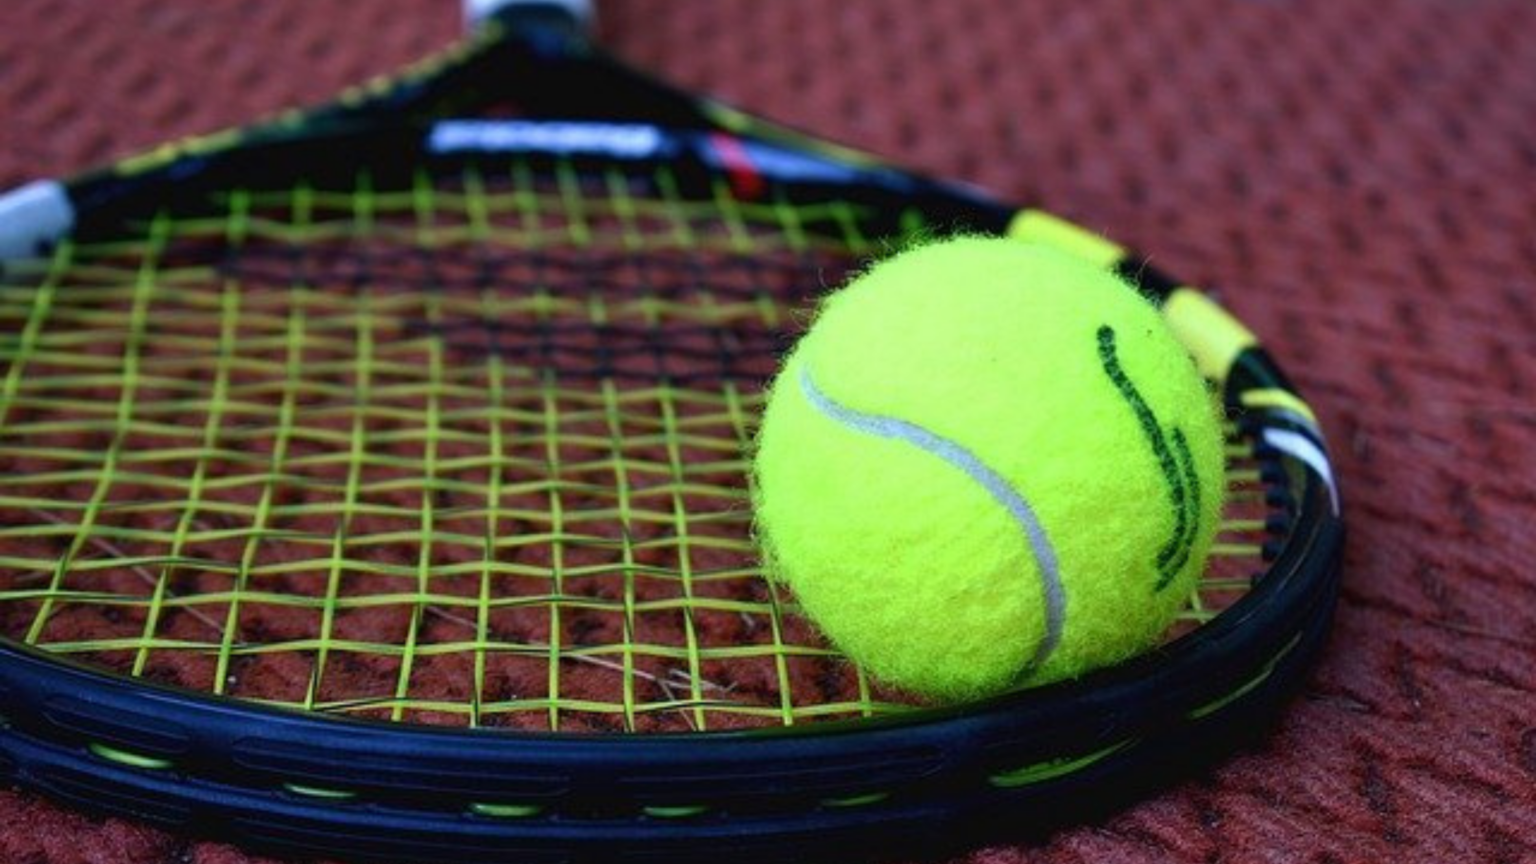 Best Tennis Strings For Spin And Slice Used By Professional Players